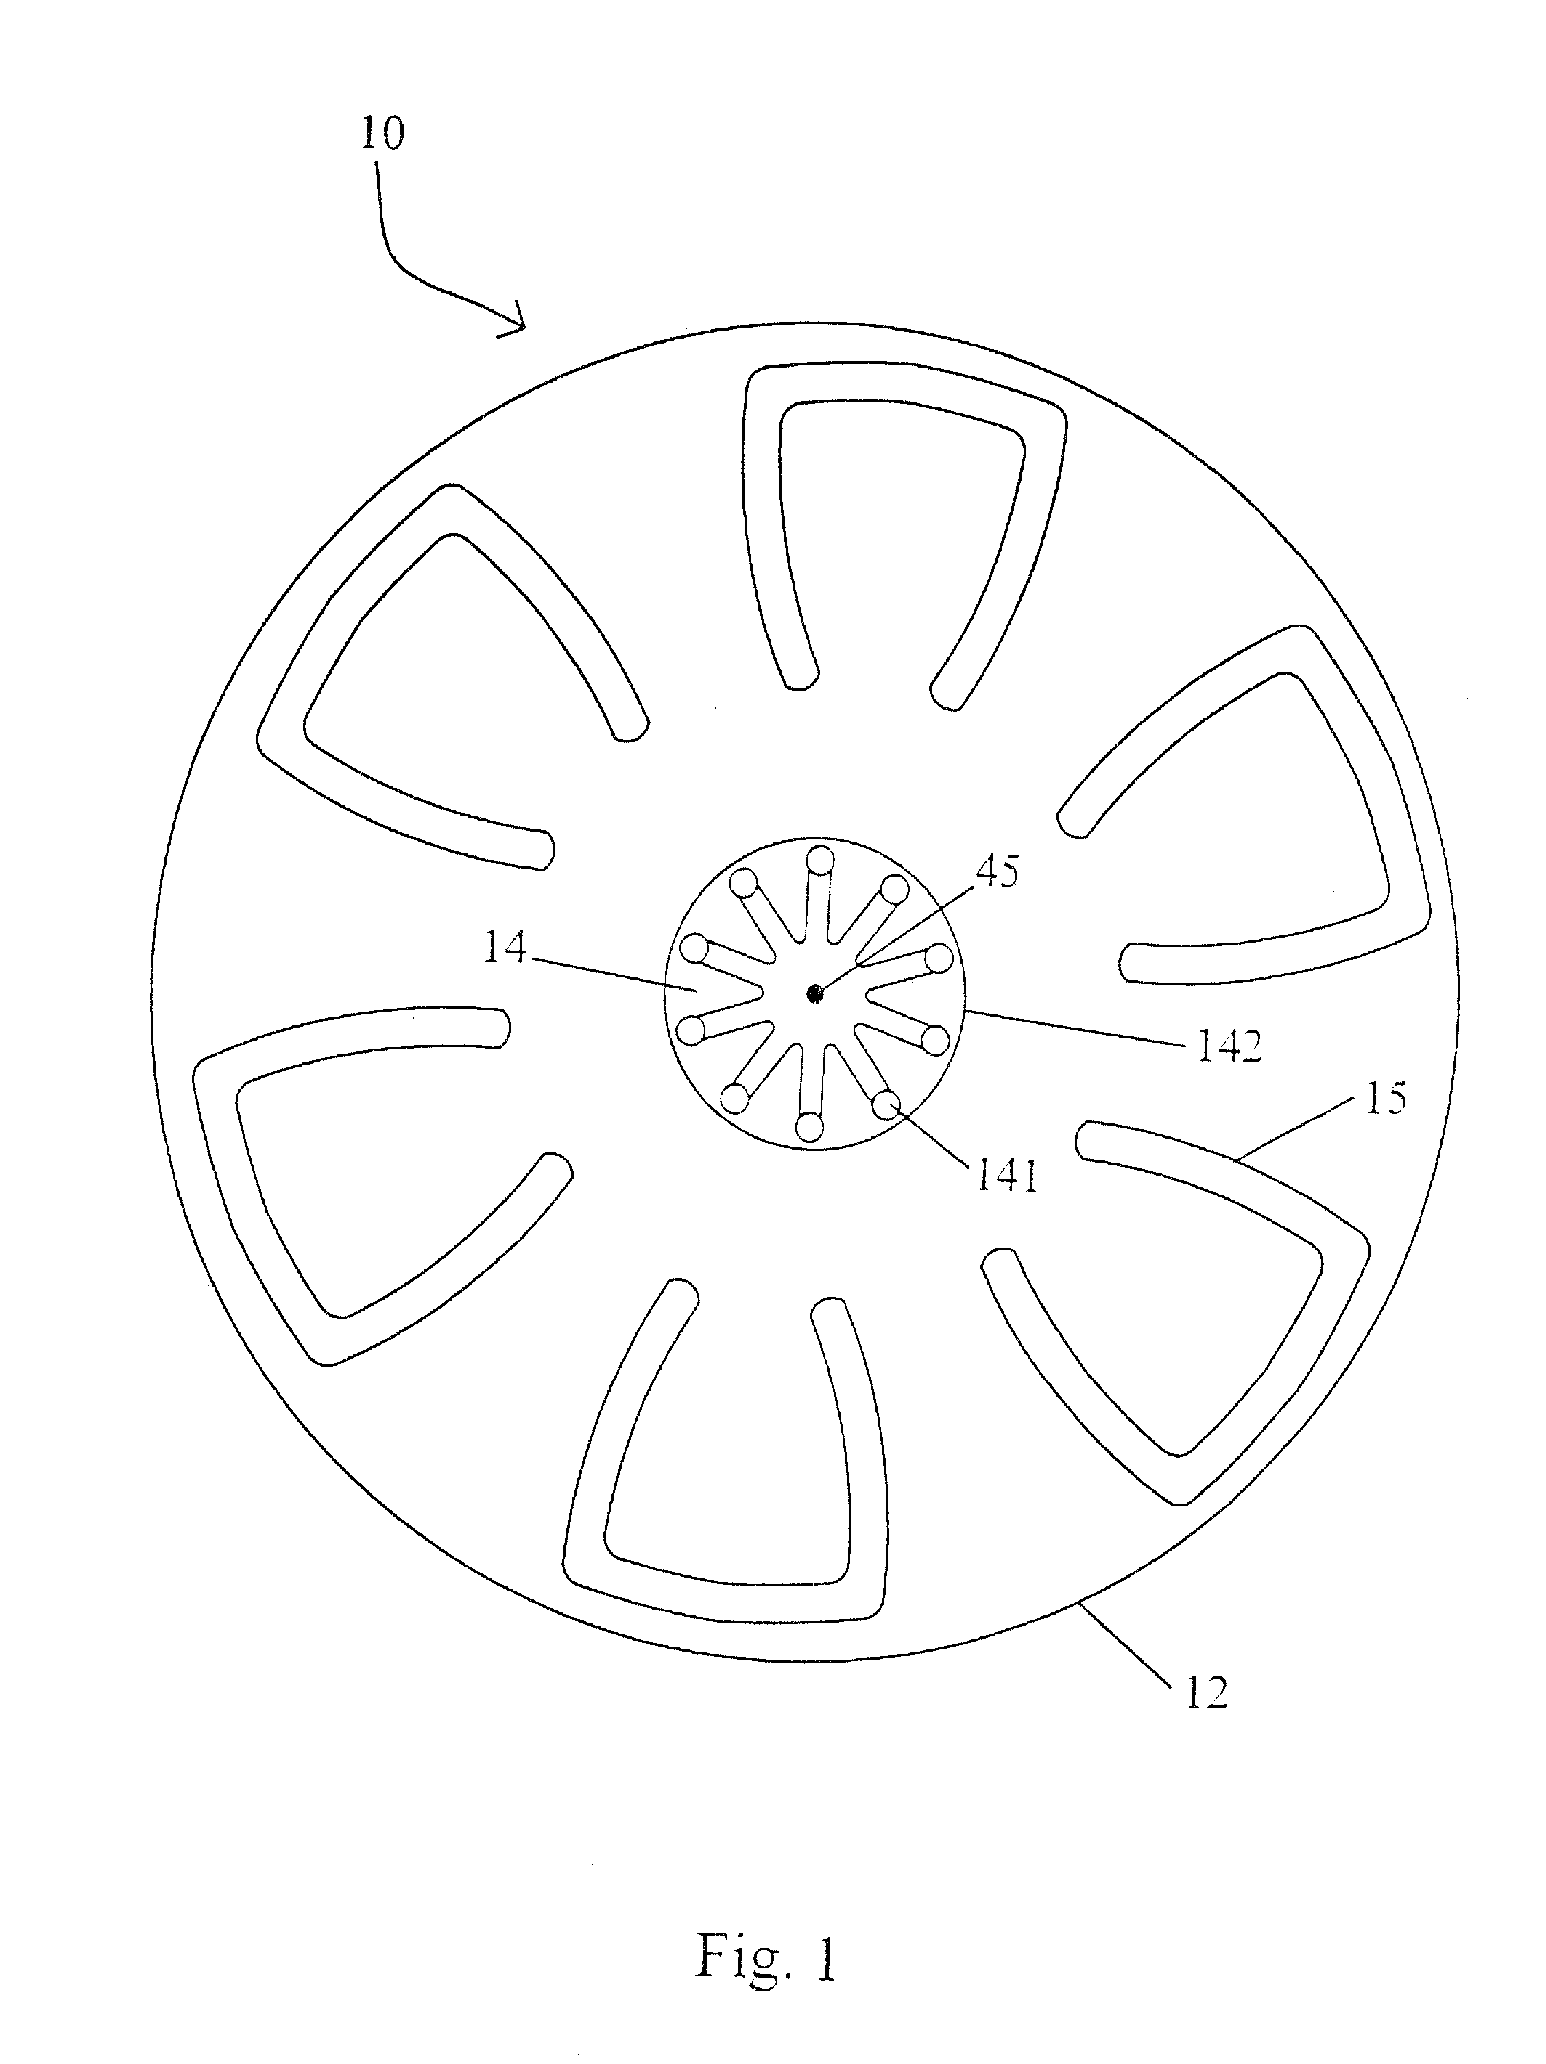 Fluid separation devices, systems and/or methods using a centrifuge and roller pump